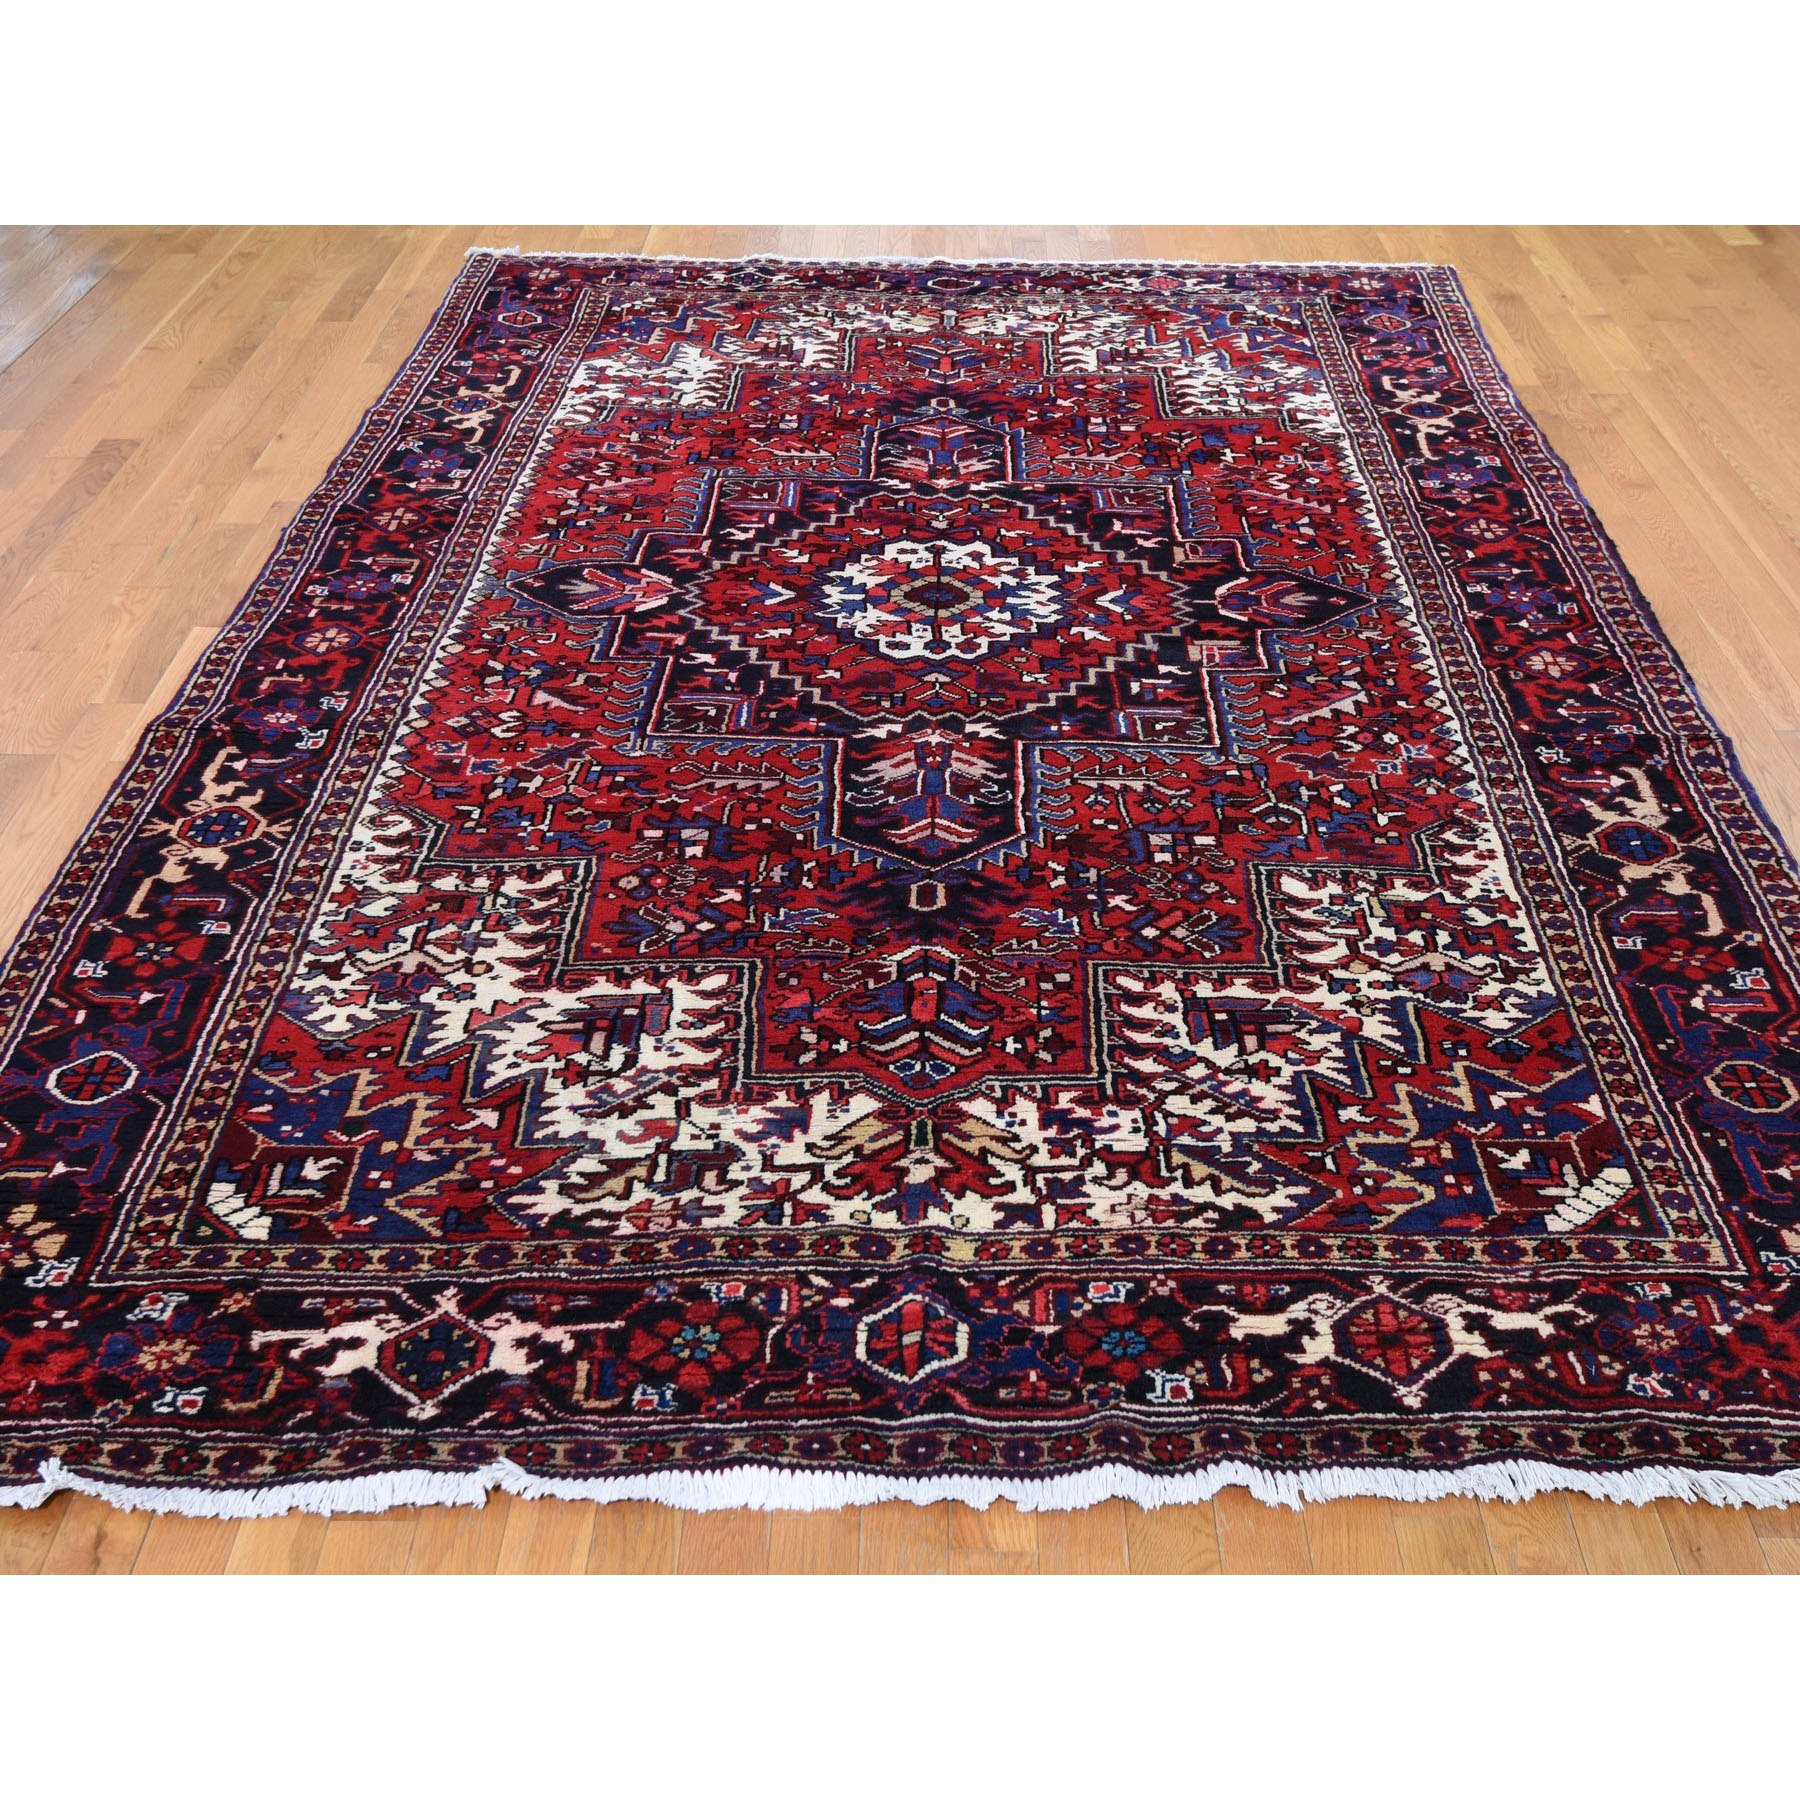 7-9 x11- Red Semi Antique Heriz Good Condition Hand Knotted Oriental Rug 